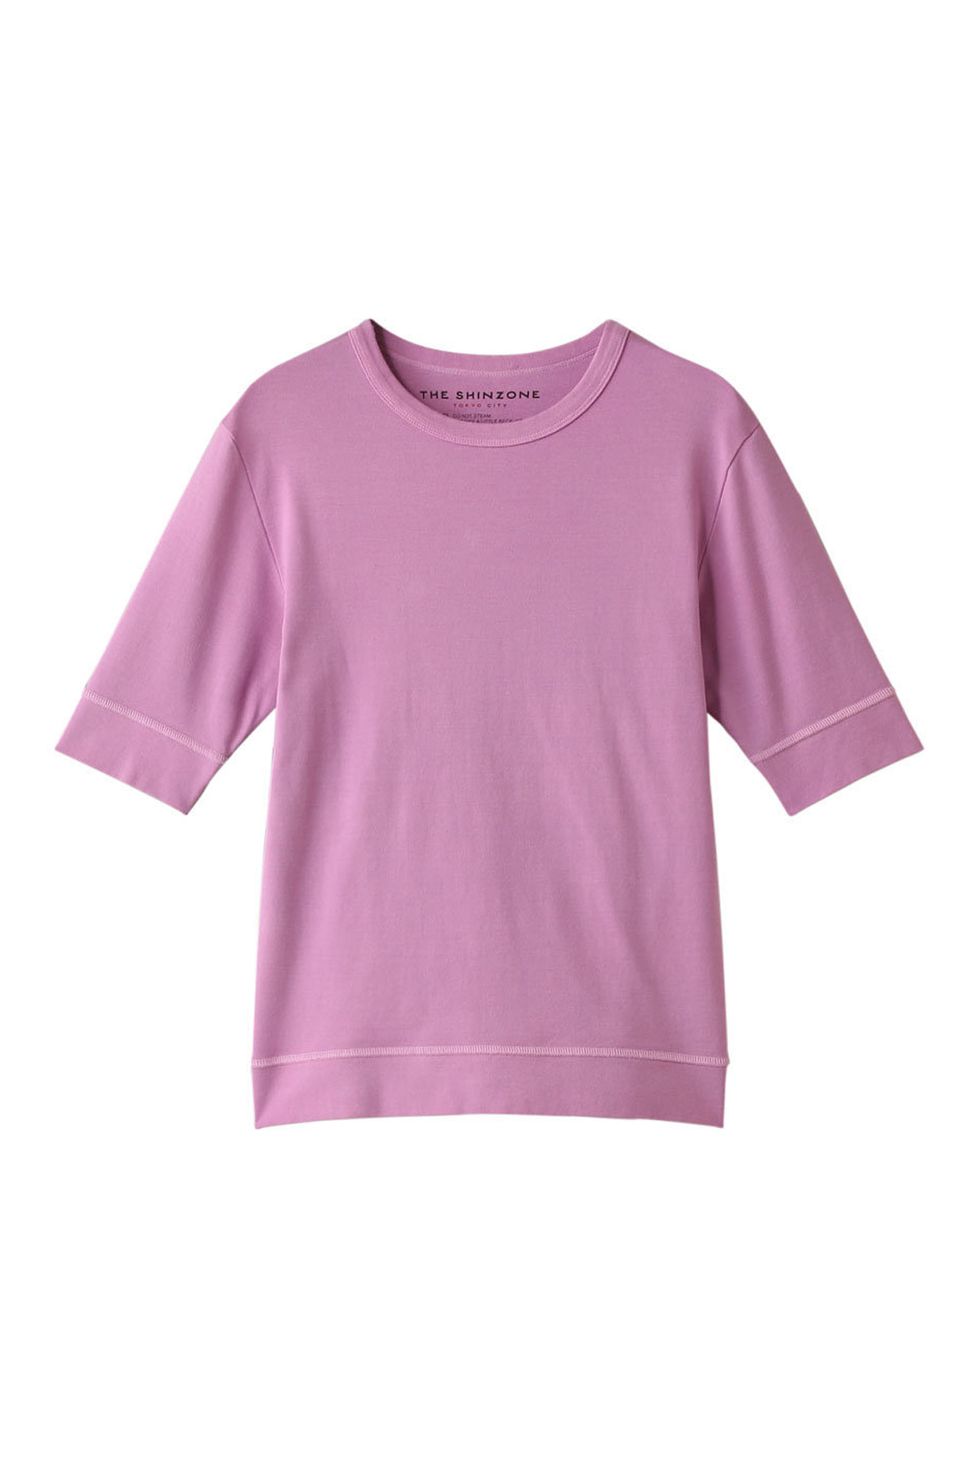 Clothing, T-shirt, Sleeve, Pink, Violet, Purple, Lilac, Outerwear, Top, Blouse, 